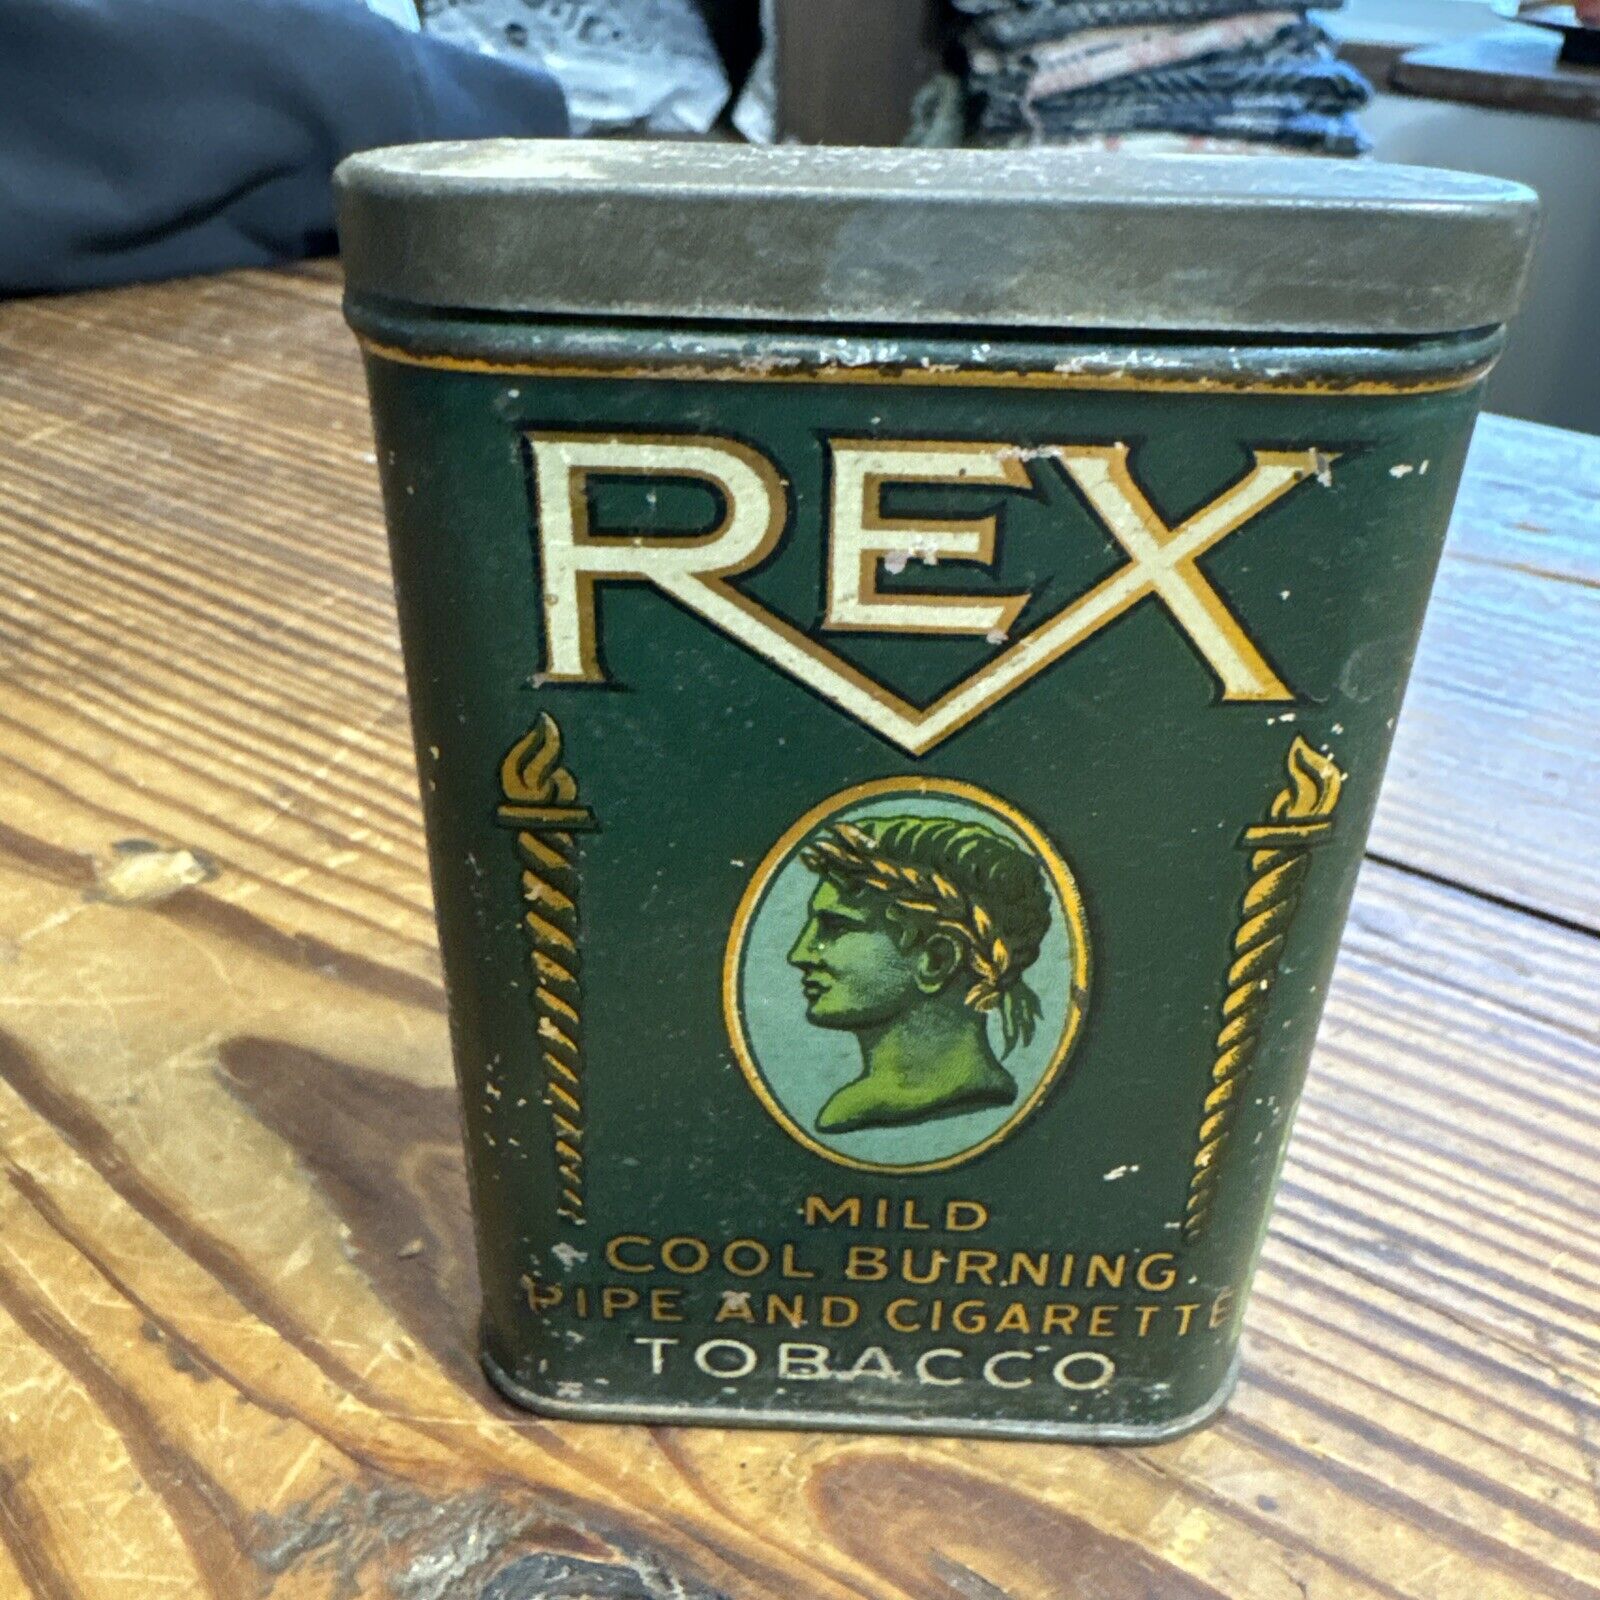 EARLY HARD TO FIND REX TOBACCO POCKET TIN SPAULDING MERRICK CHICAGO ILLINOIS